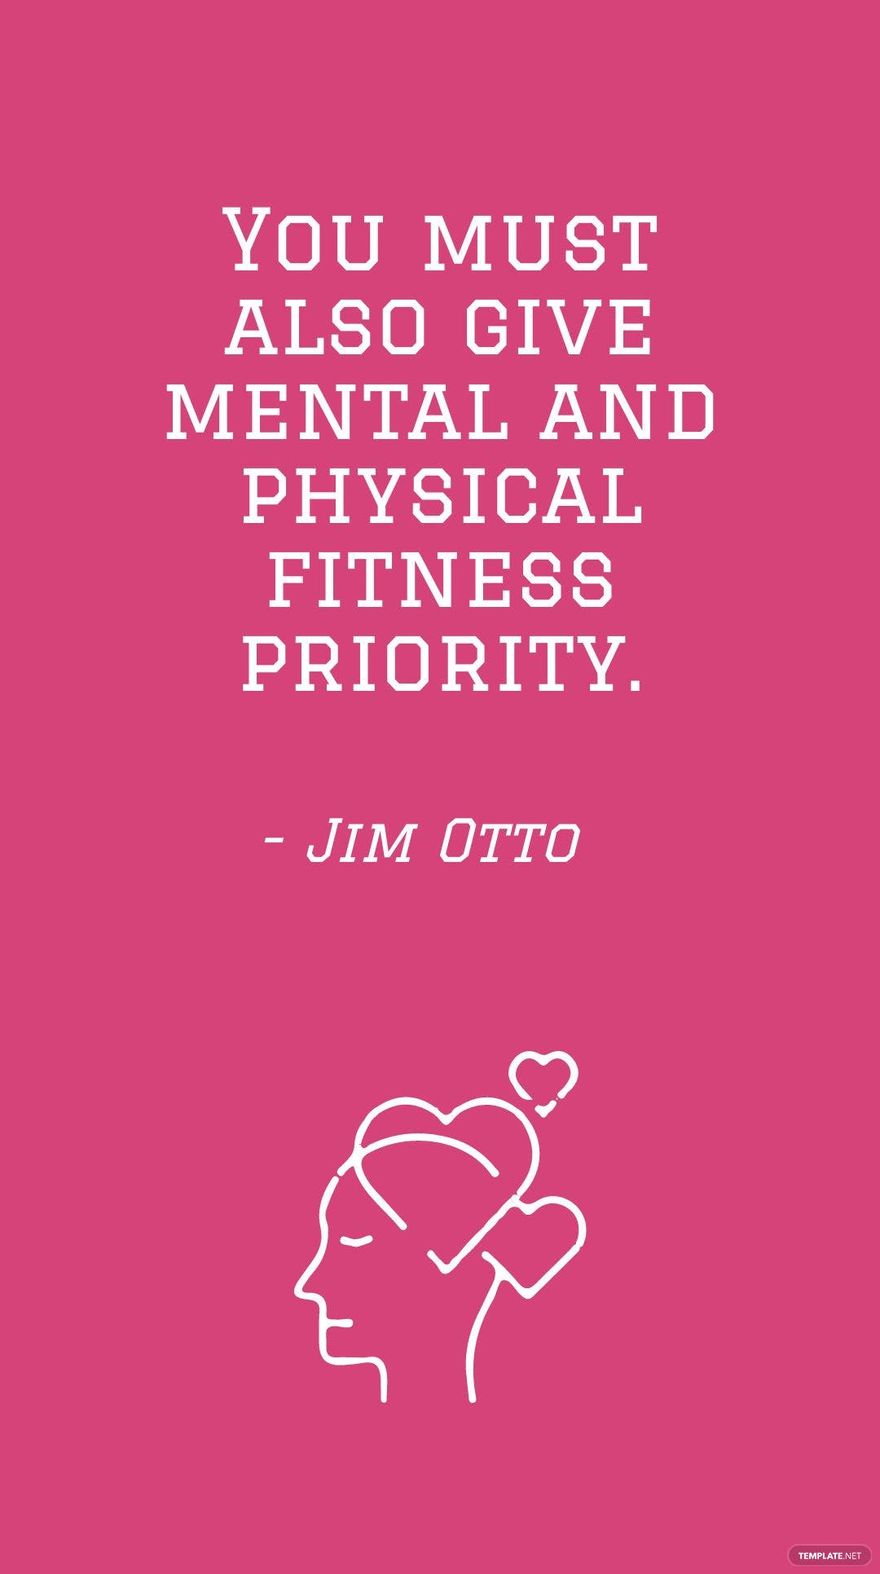 Jim Otto - You must also give mental and physical fitness priority. in JPG